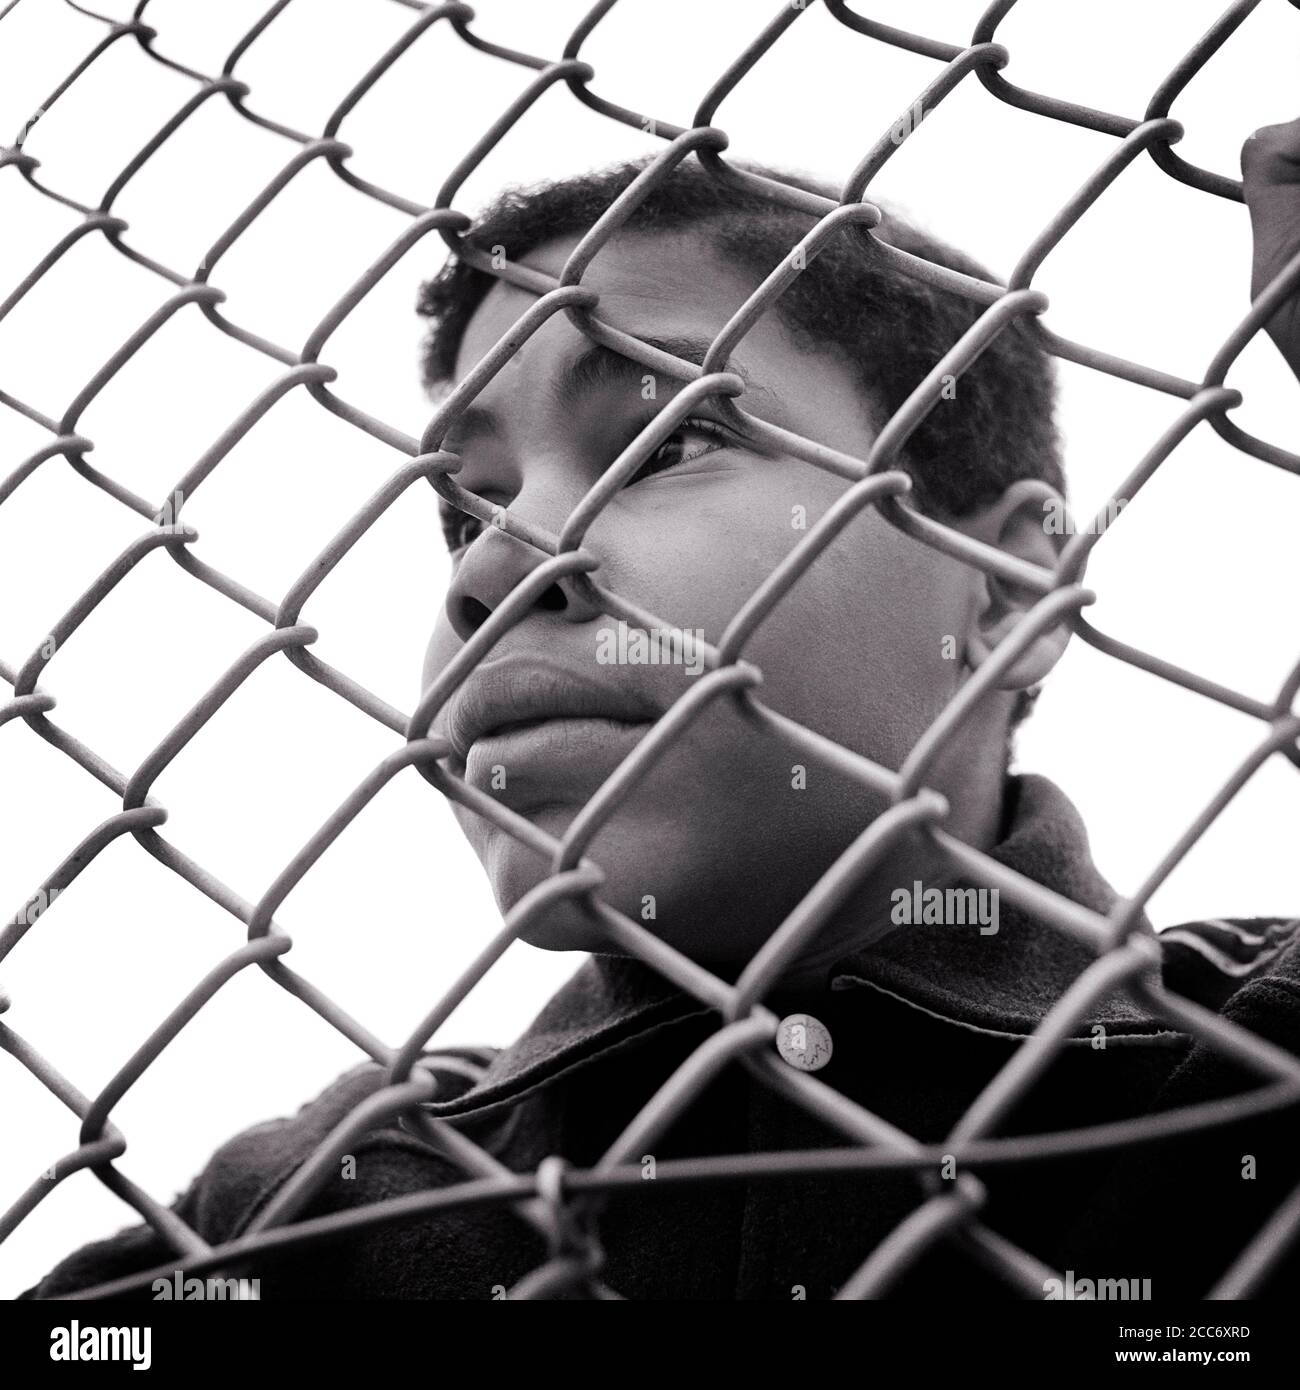 1960s WORRIED CONCERNED SINGLE AFRICAN-AMERICAN TEENAGE BOY LOOKING THRU A CHAIN-LINK FENCE THINKING ABOUT AN UNCERTAIN FUTURE - n1934 HAR001 HARS ANGER FEAR WORRY LIFESTYLE MOODY POOR HOME LIFE COPY SPACE HALF-LENGTH PERSONS MALES RISK TEENAGE BOY ABOUT EXPRESSIONS TROUBLED B&W CONCERNED SADNESS FREEDOM GOALS DREAMS HEAD AND SHOULDERS AFRICAN-AMERICANS AFRICAN-AMERICAN LOW ANGLE BLACK ETHNICITY A AN MOOD CONCEPTUAL GLUM DEPRIVED ESCAPE TEENAGED DENIED DISADVANTAGED LOOKING IN BARRIER CHAIN-LINK CONFINED DISAFFECTED DISAPPOINTED DISCONNECTED GROWTH IMPOVERISHED JUVENILES MISERABLE TRAPPED Stock Photo